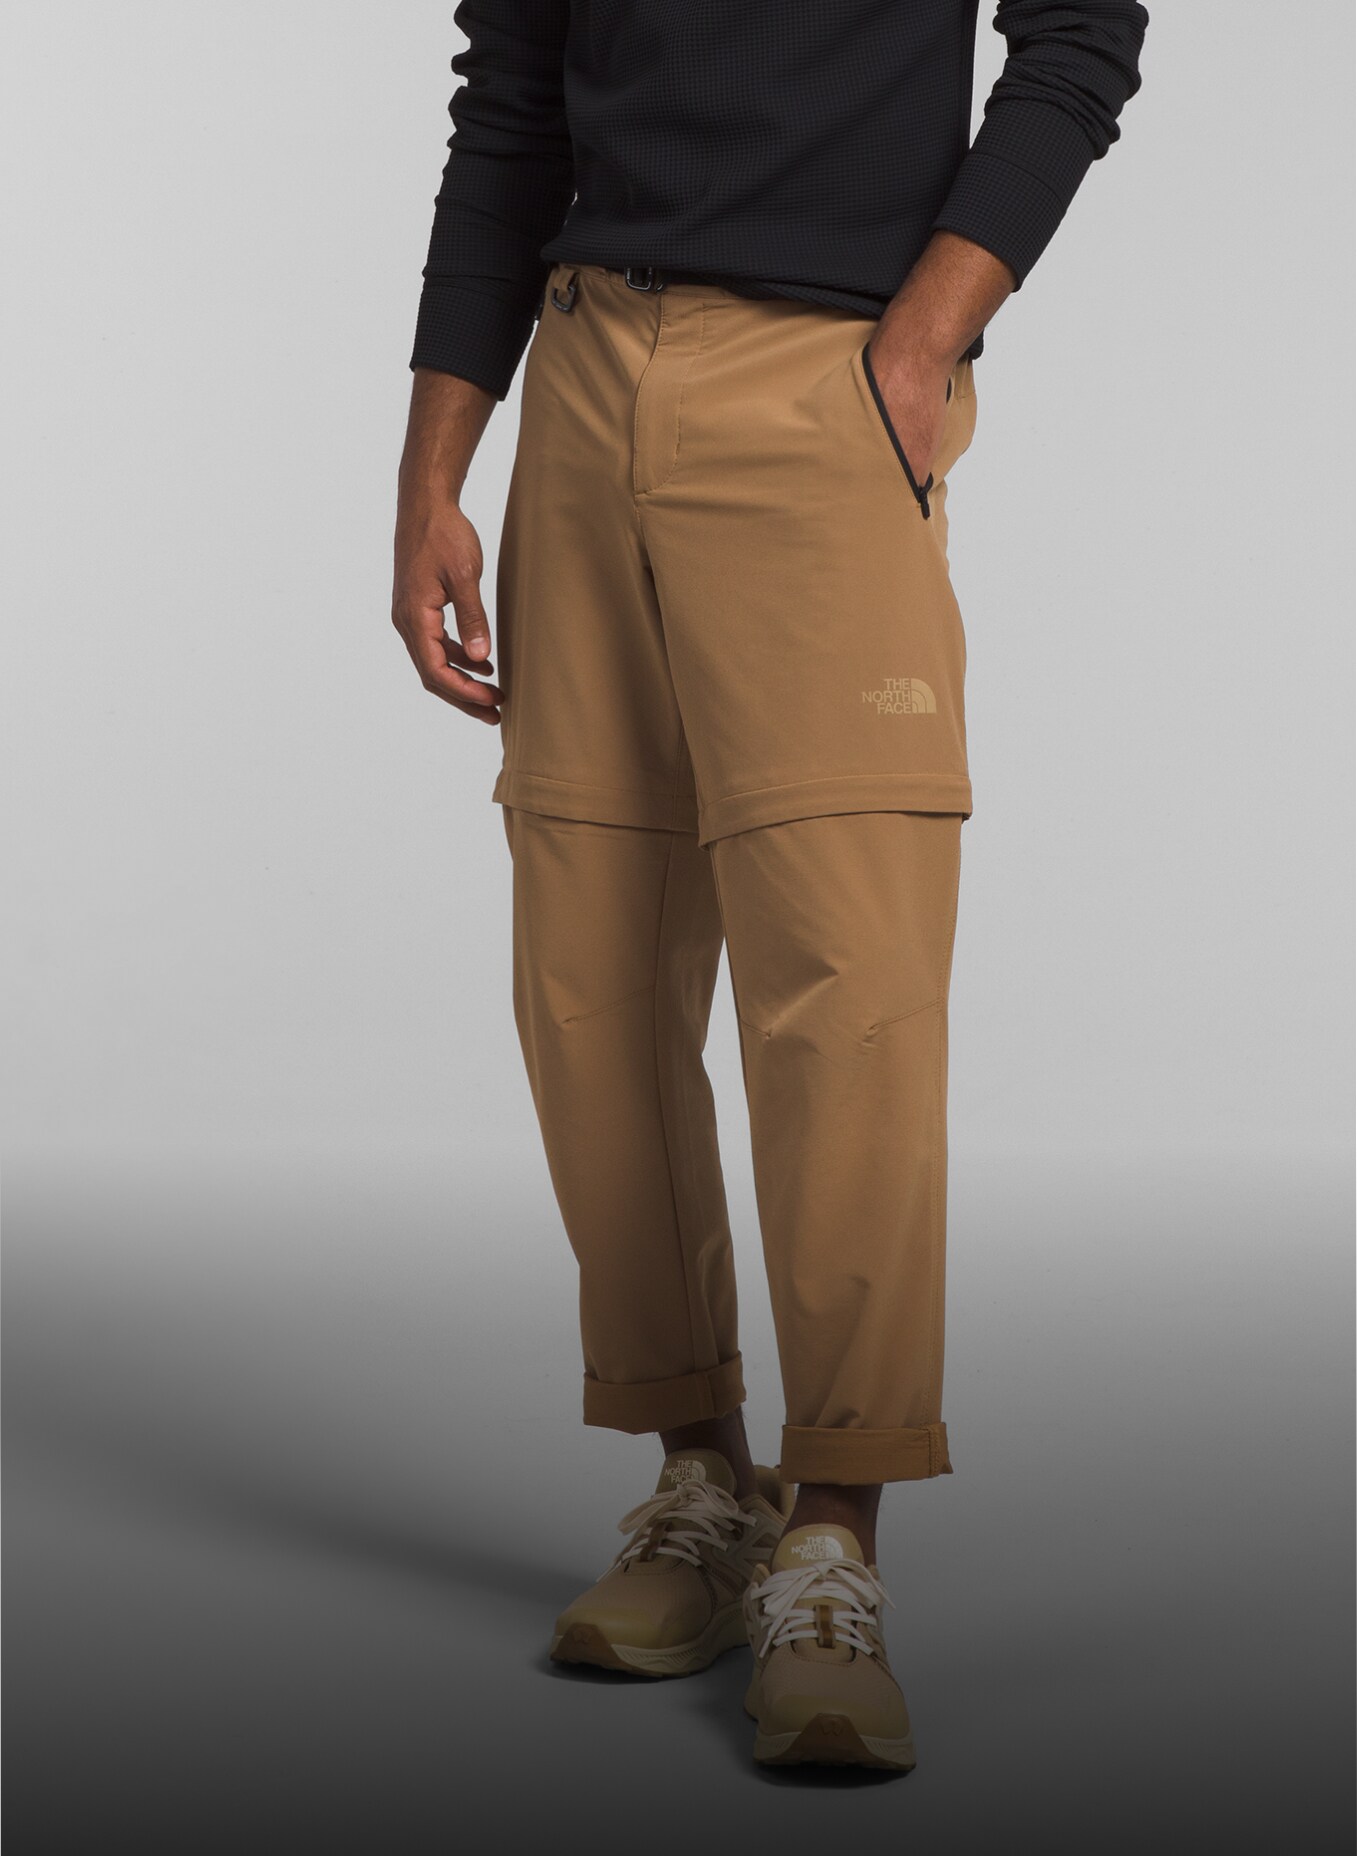 A front view of the Men’s Paramount Pro Convertible Pants.